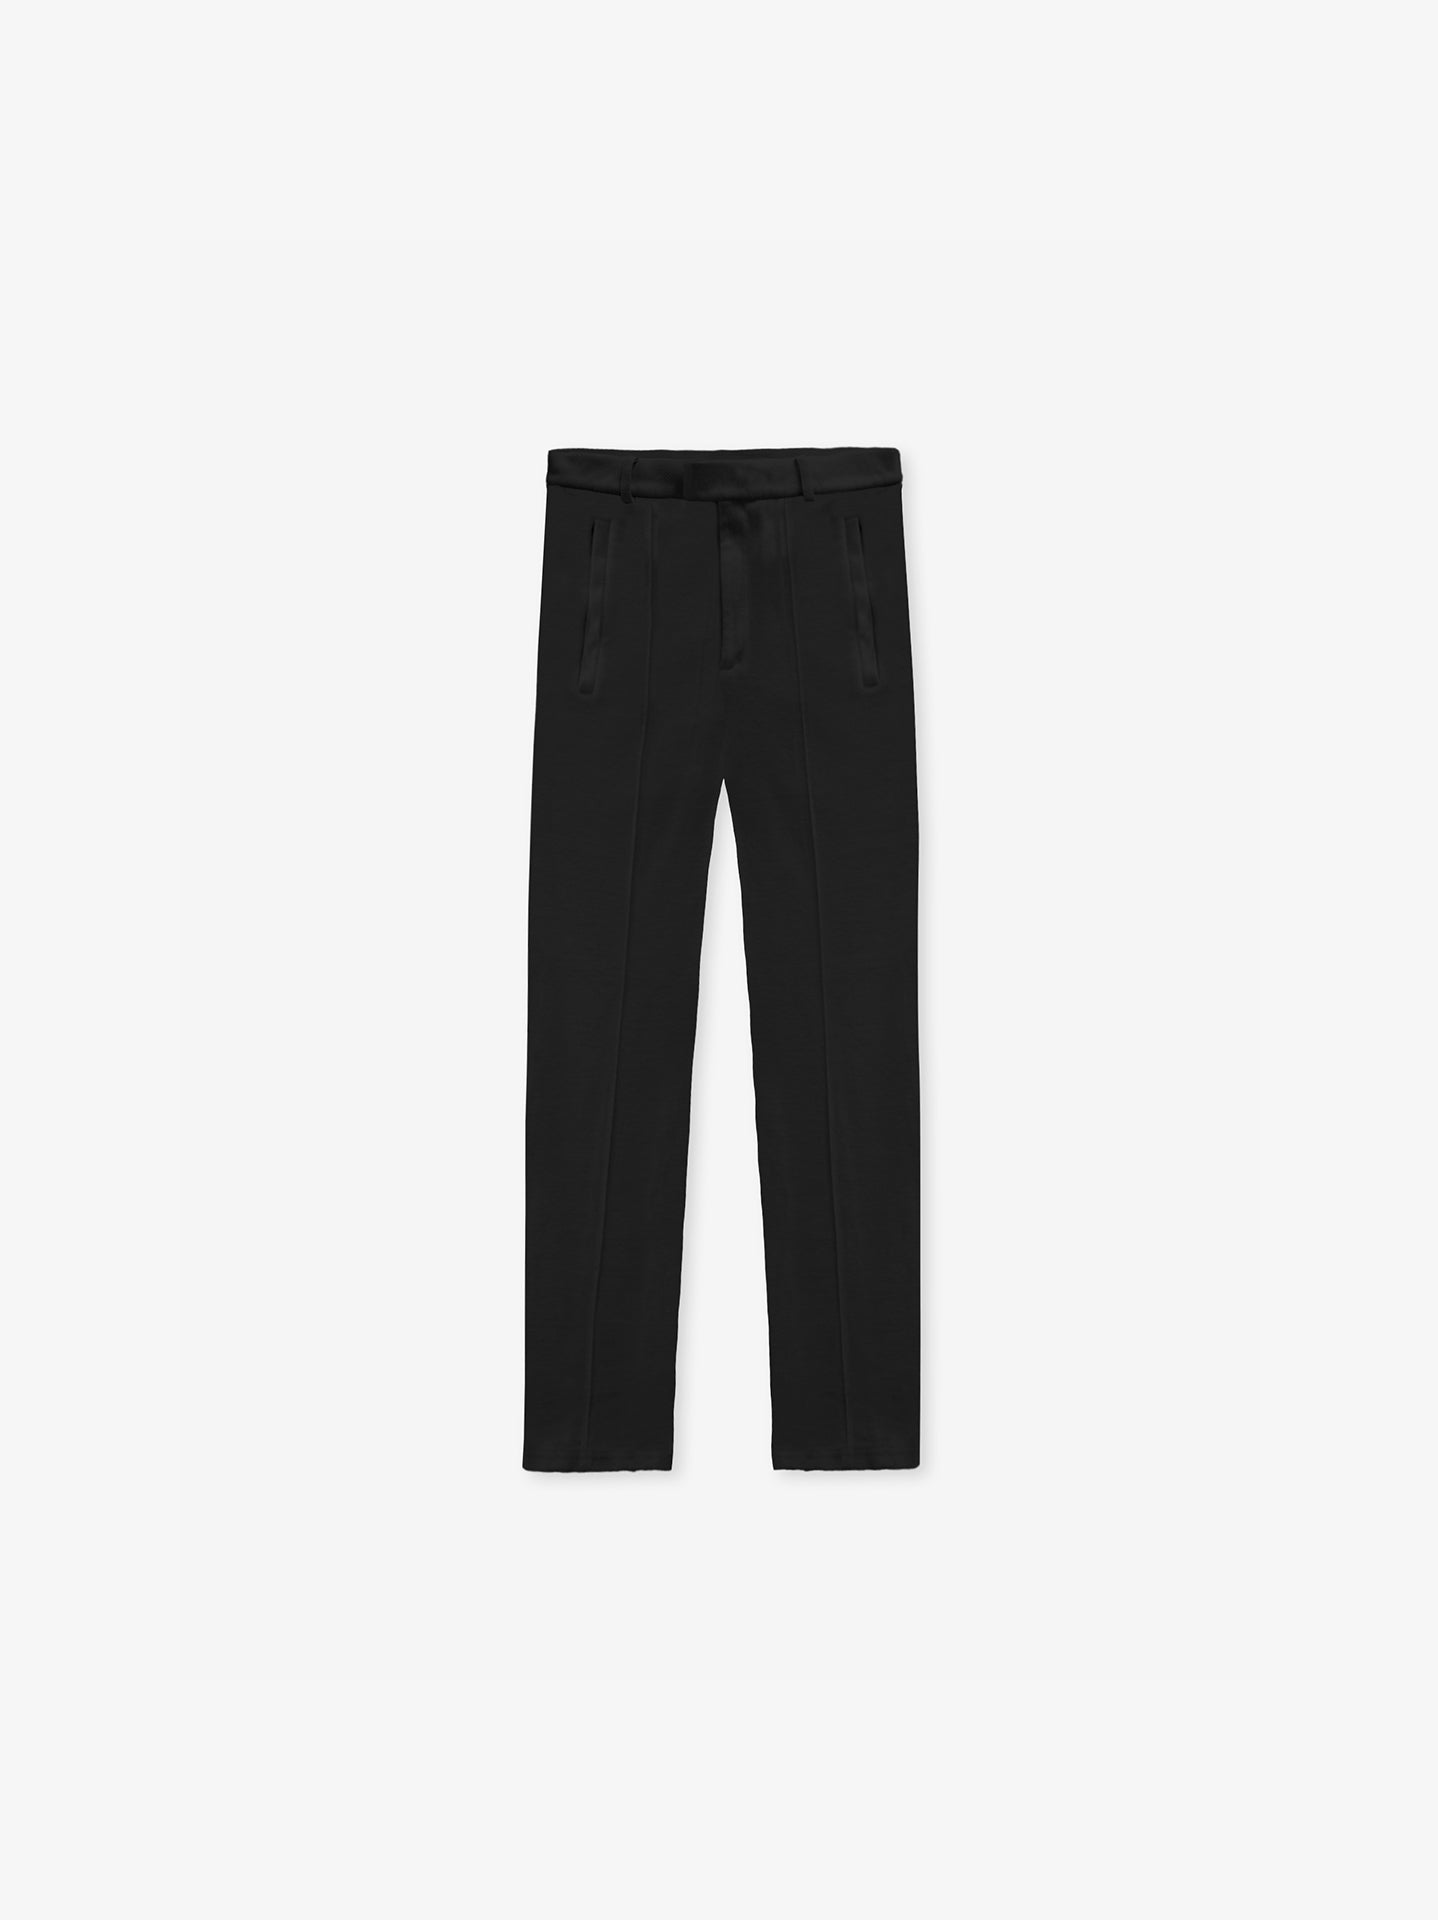 Inside Out Tailored Pants - Black